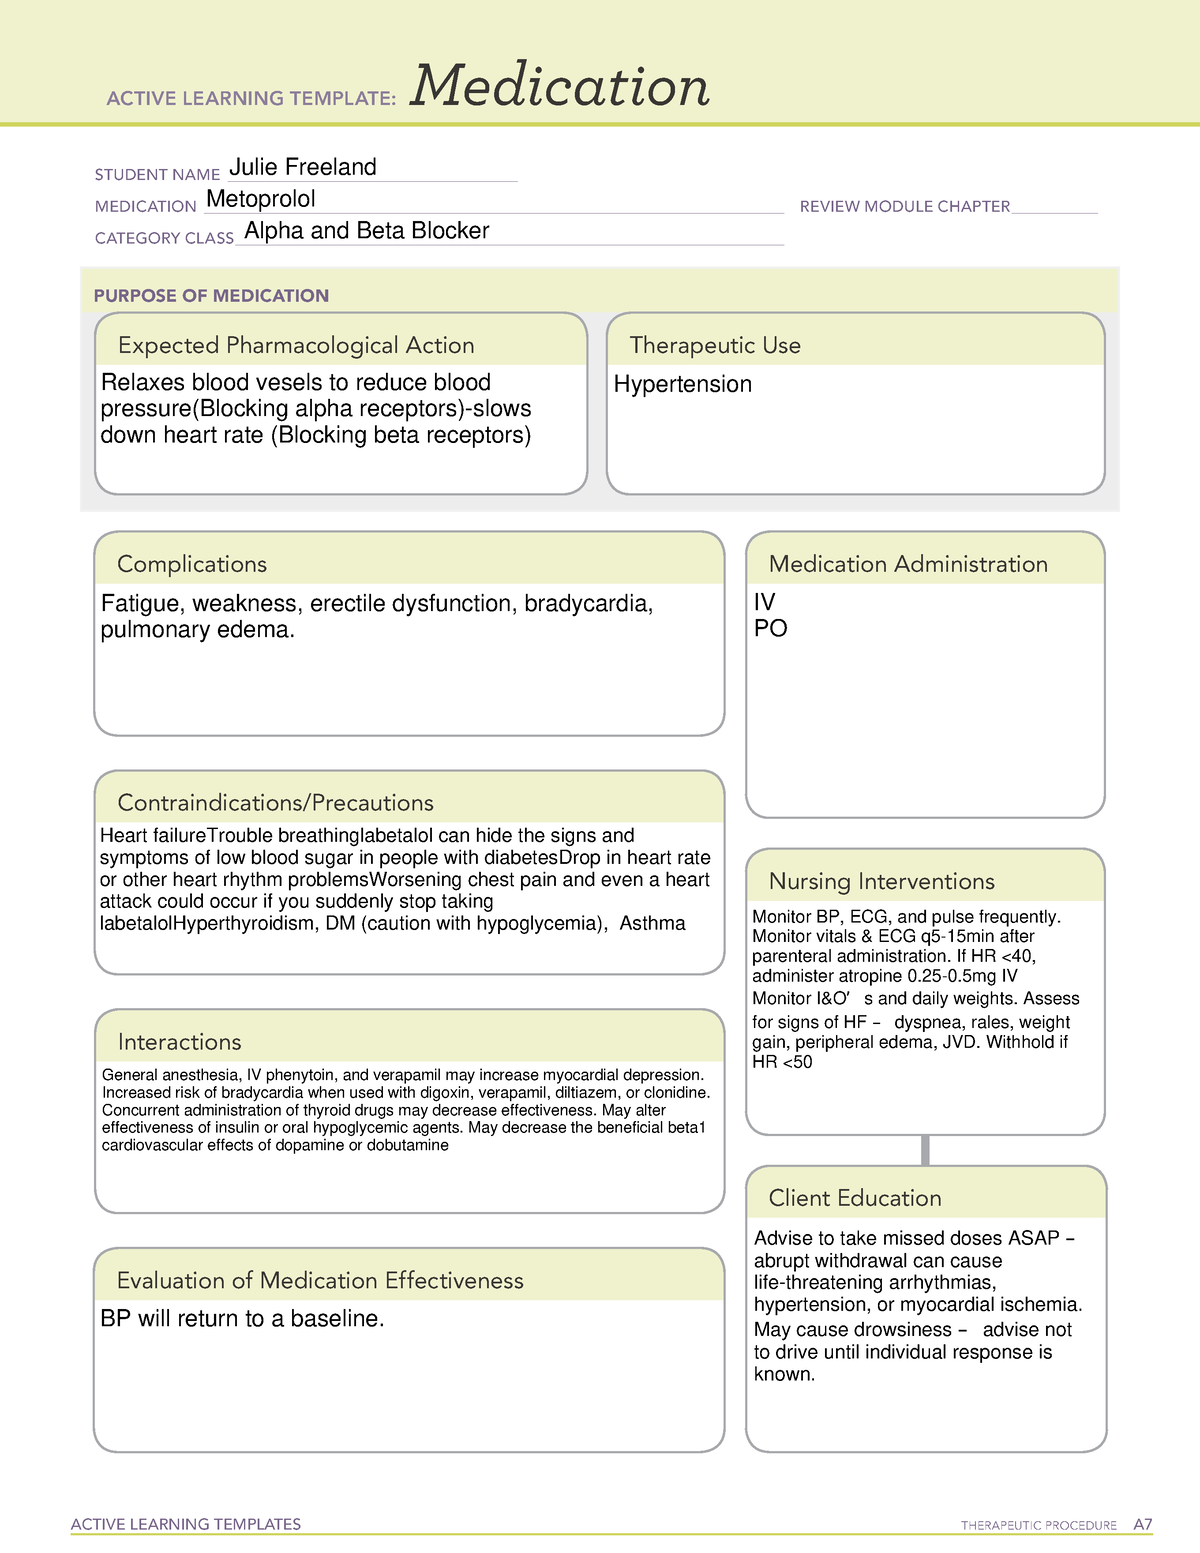 Active Learning Template Metoprolol ACTIVE LEARNING TEMPLATES